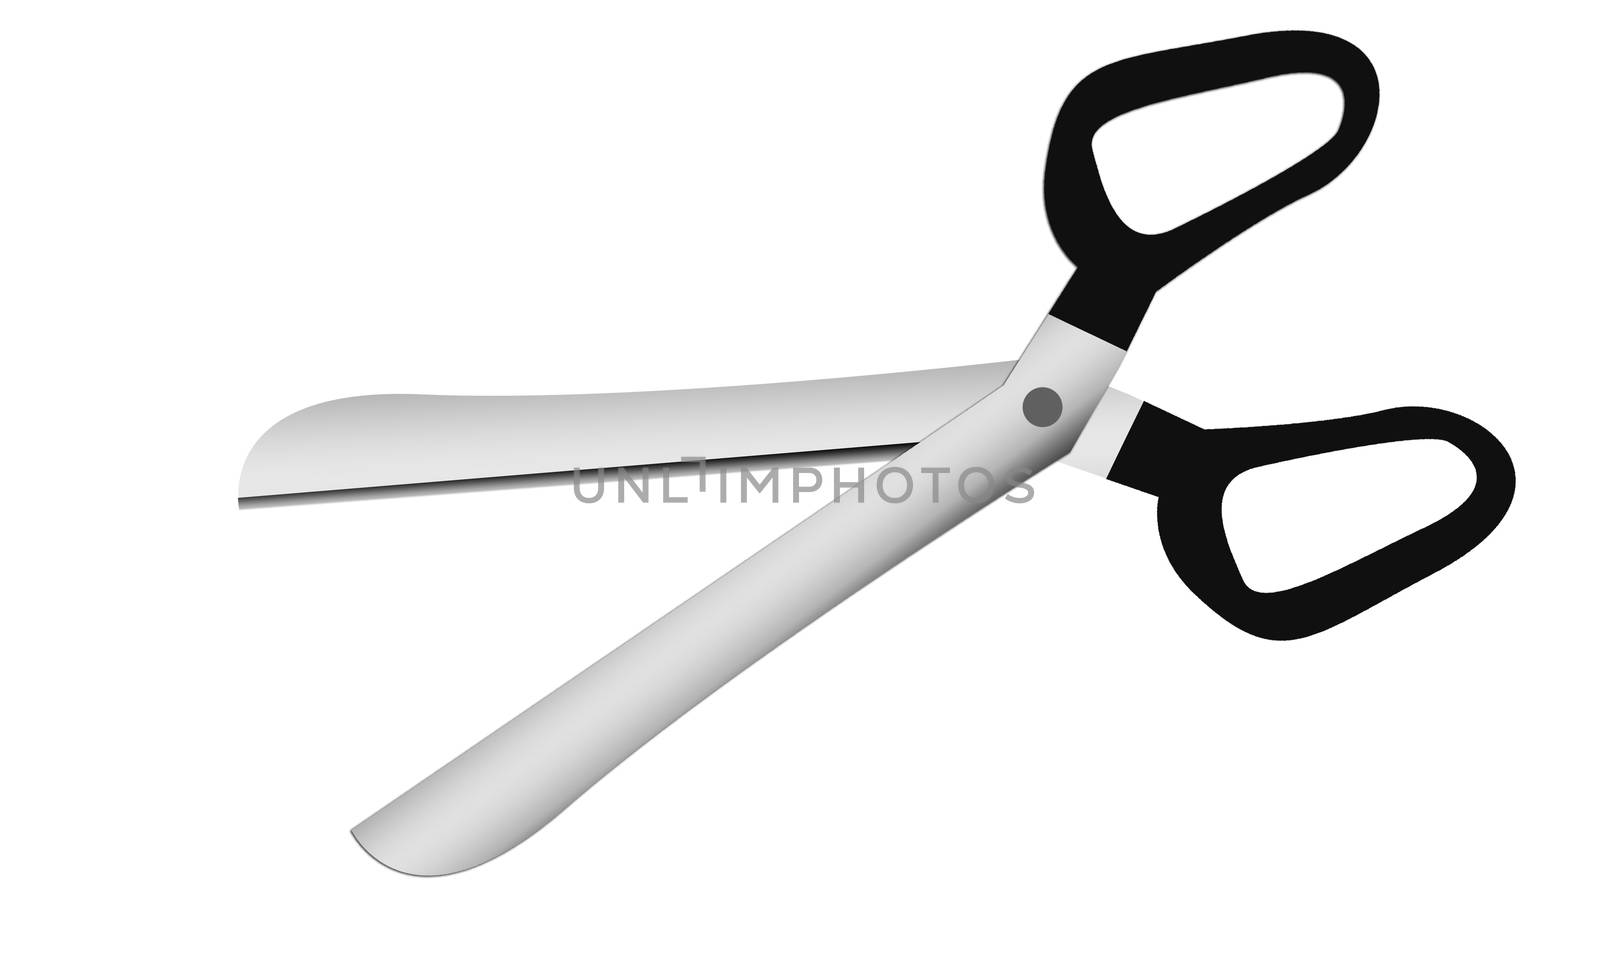 Stationery scissor isolated on white background by tang90246